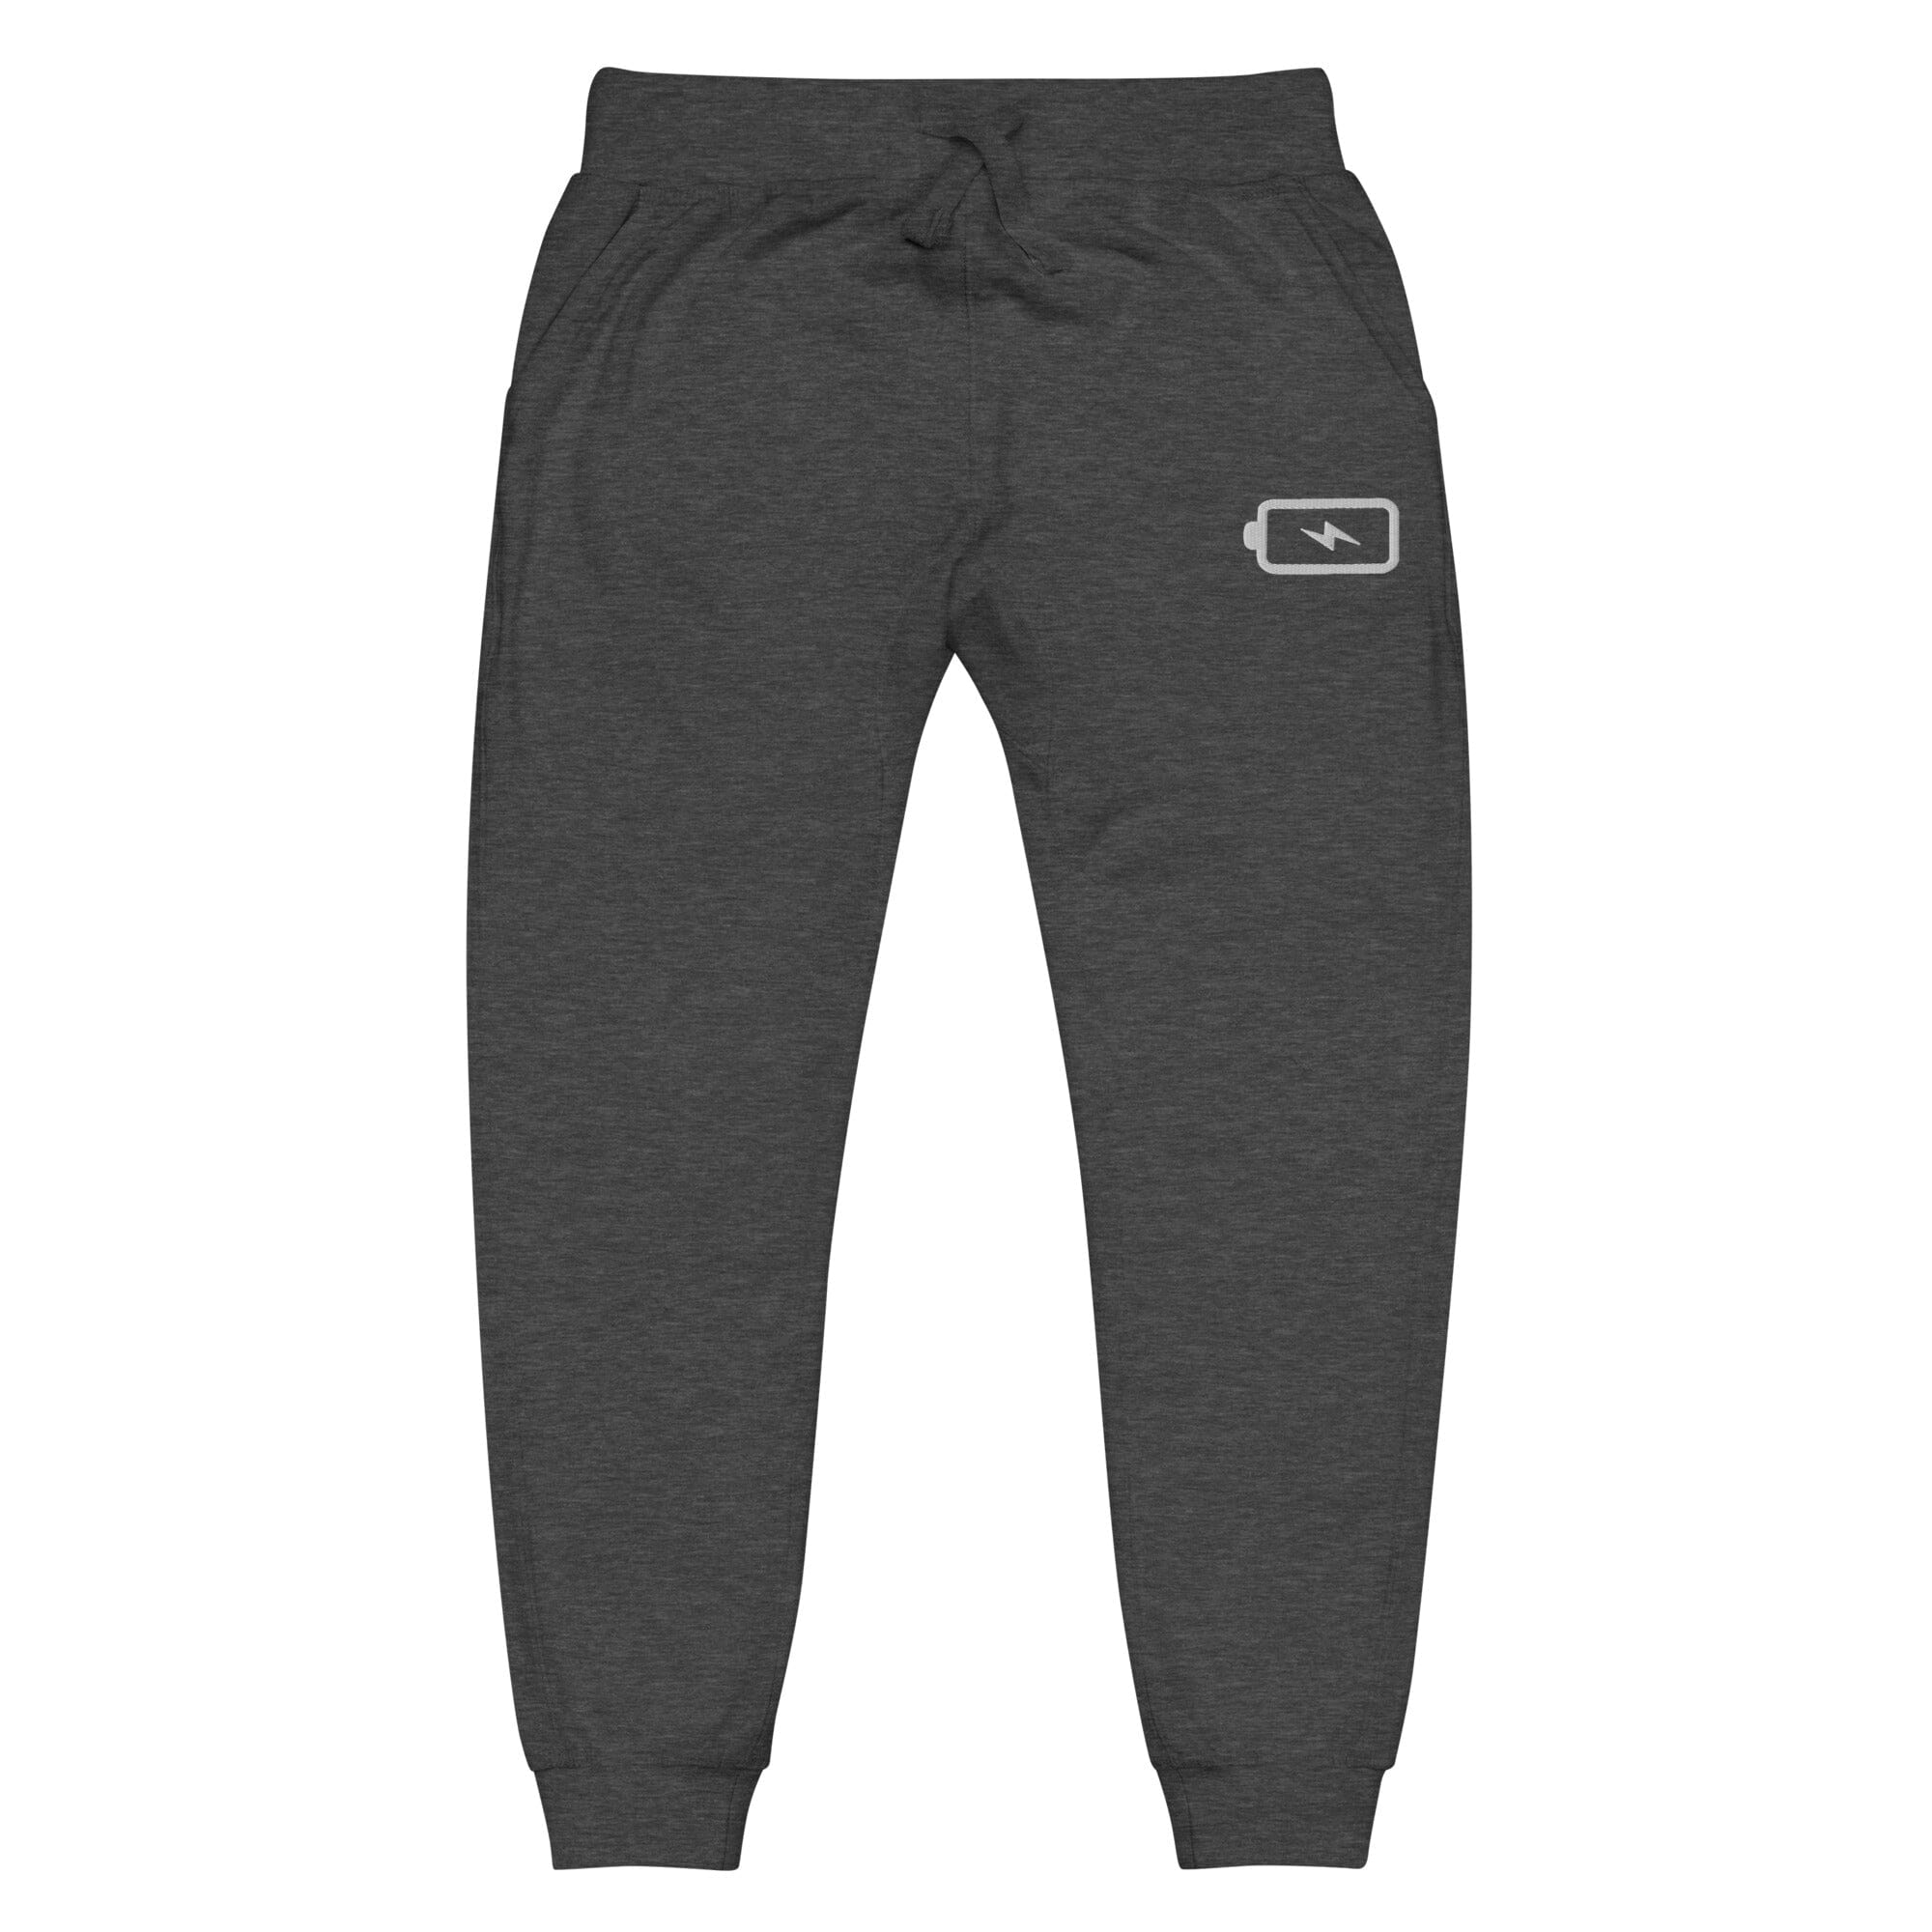 Battery Recharge | Unisex fleece sweatpants | Gamer Affirmations Threads & Thistles Inventory Charcoal Heather XS 